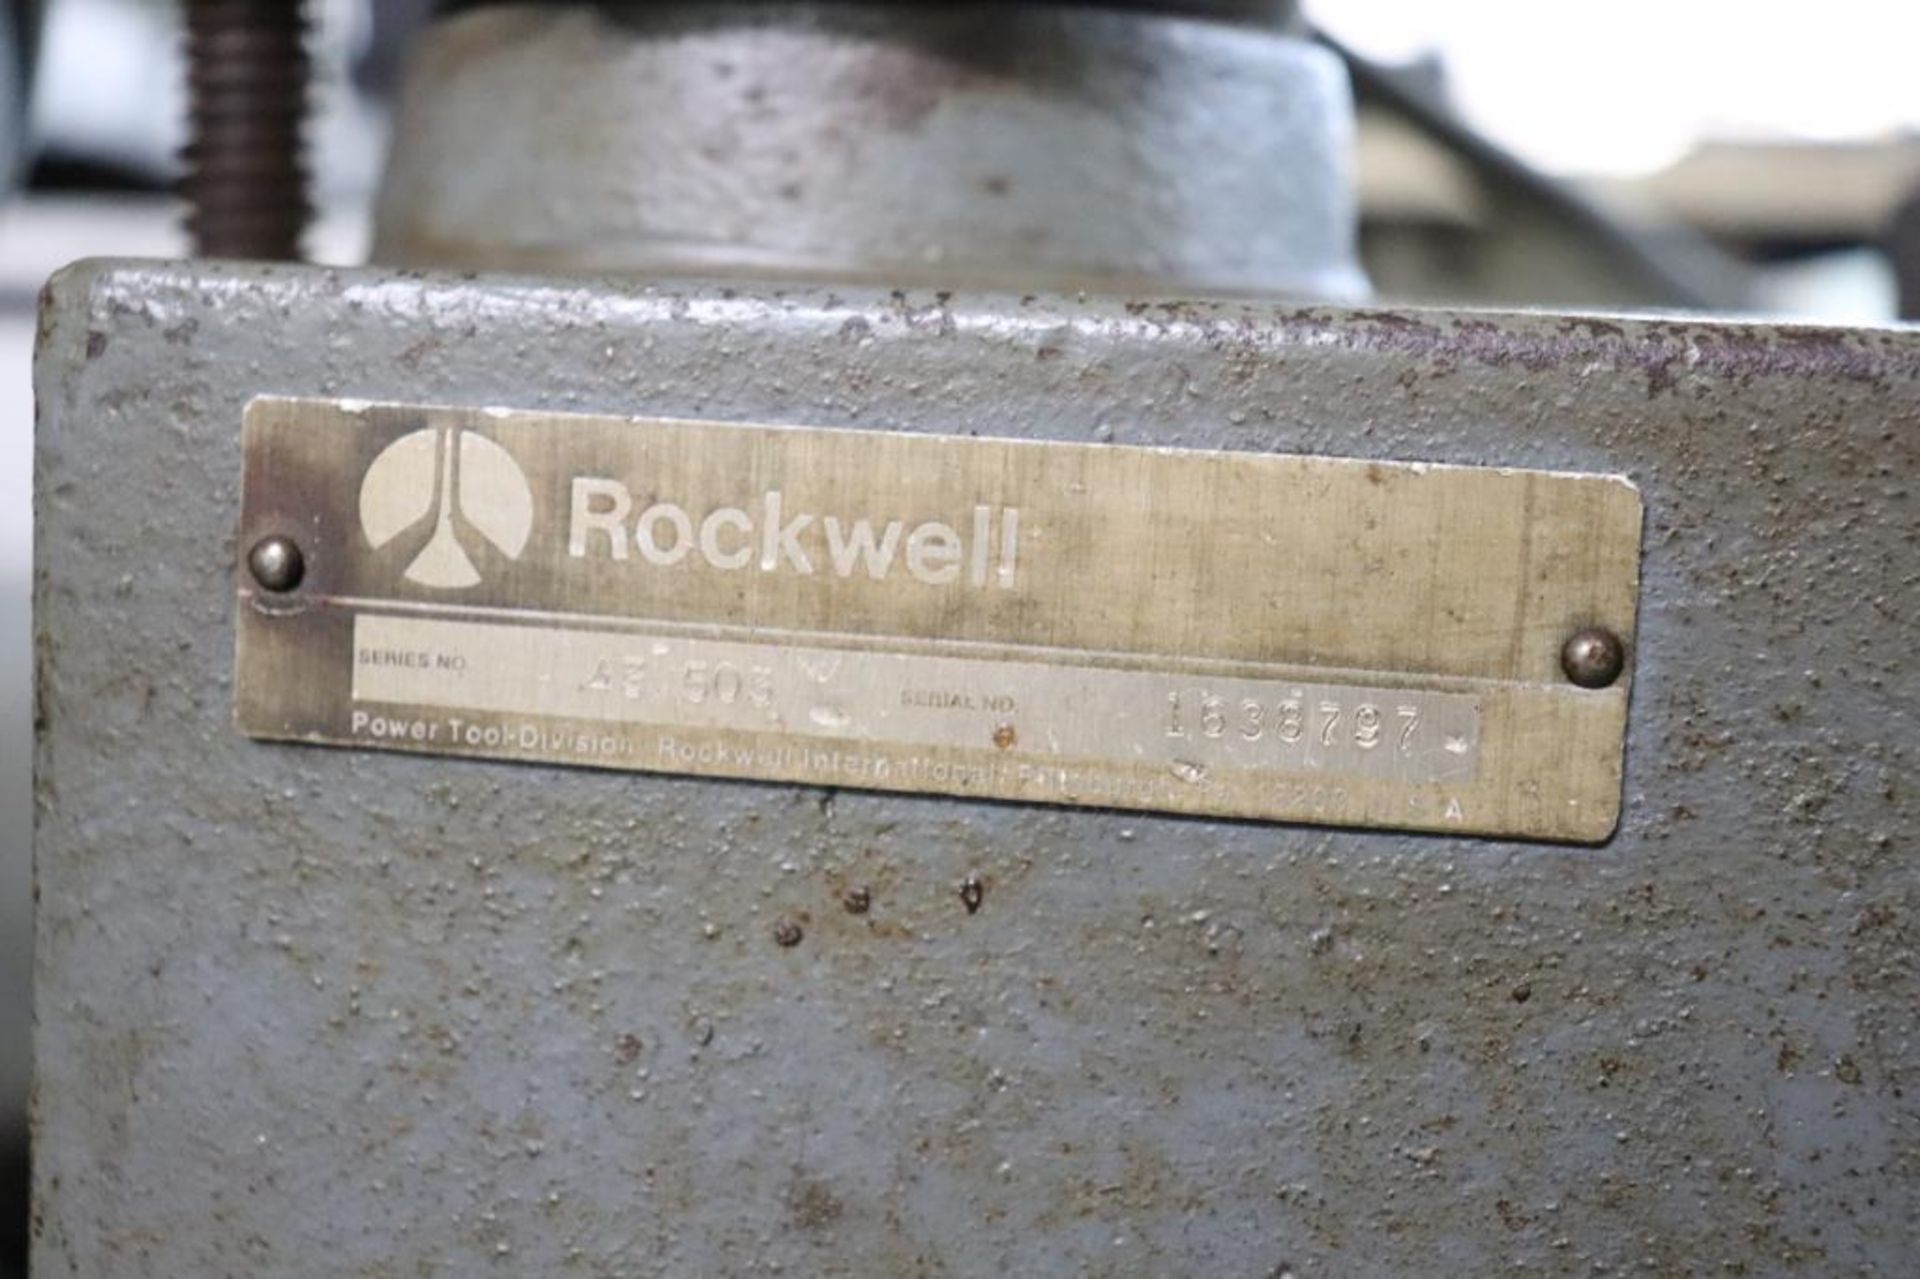 Rockwell 43 503 Over Arm Router/ Shaper - Image 4 of 6